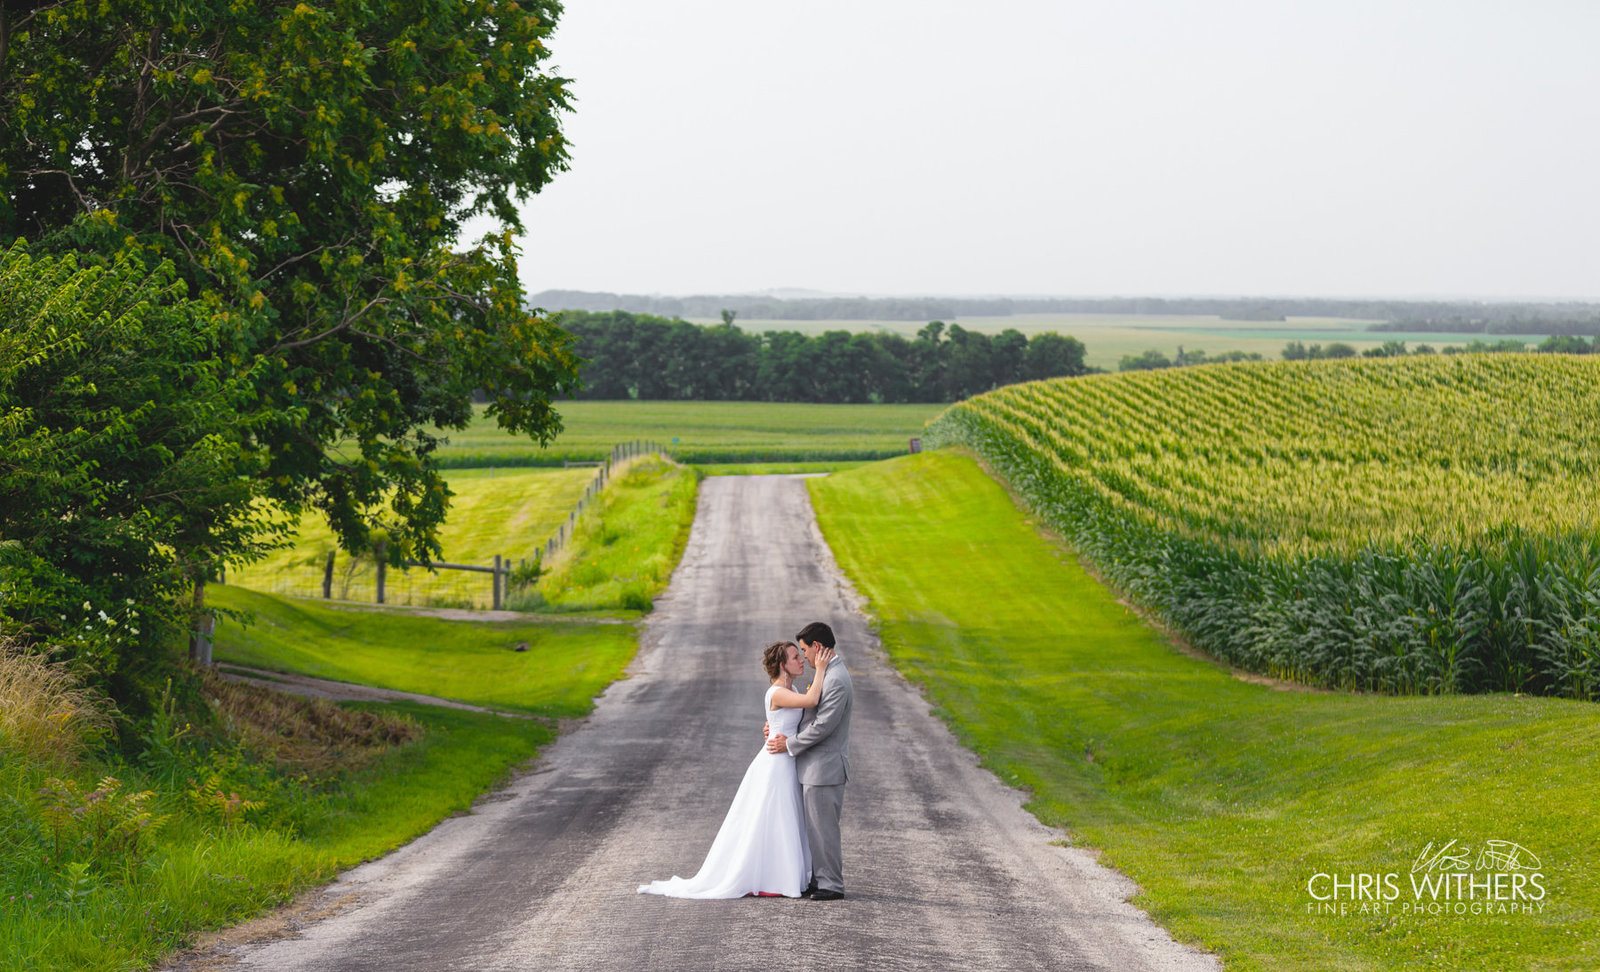 Springfield Illinois Wedding Photographer - Chris Withers Photography (35 of 159)